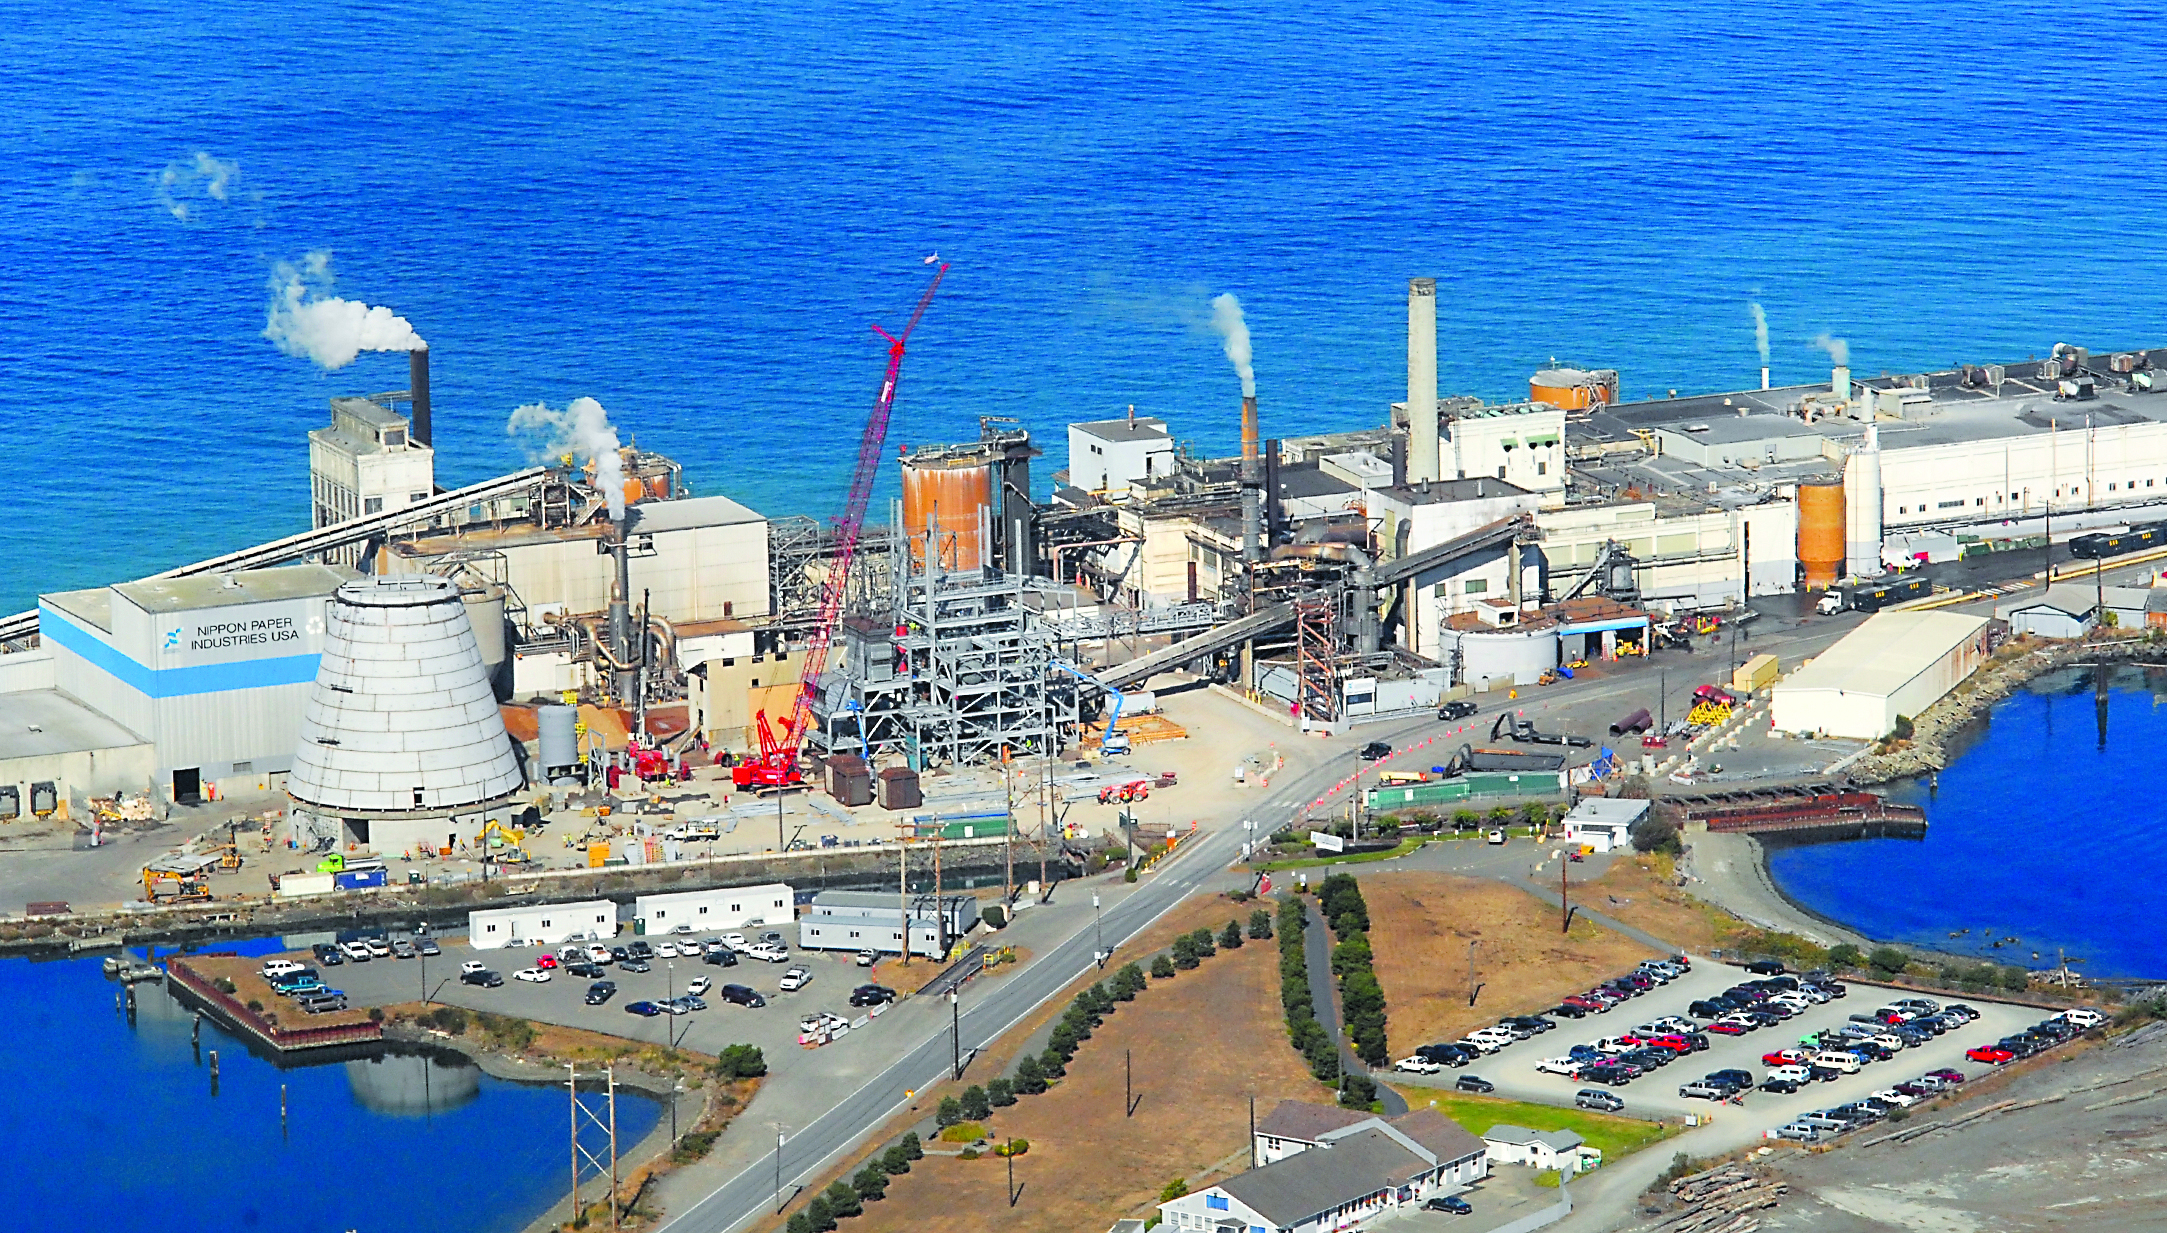 A biomass-fueled cogeneration plant takes shape at the Nippon Paper Industries USA mill at the base of Ediz Hook in Port Angeles. The cone-shaped building at the left is the fuel storage facility. To the right of that building are the first four stories of the steel skeleton that will be the 110-foot boiler.  -- Photo by Keith Thorpe/Peninsula Daily News